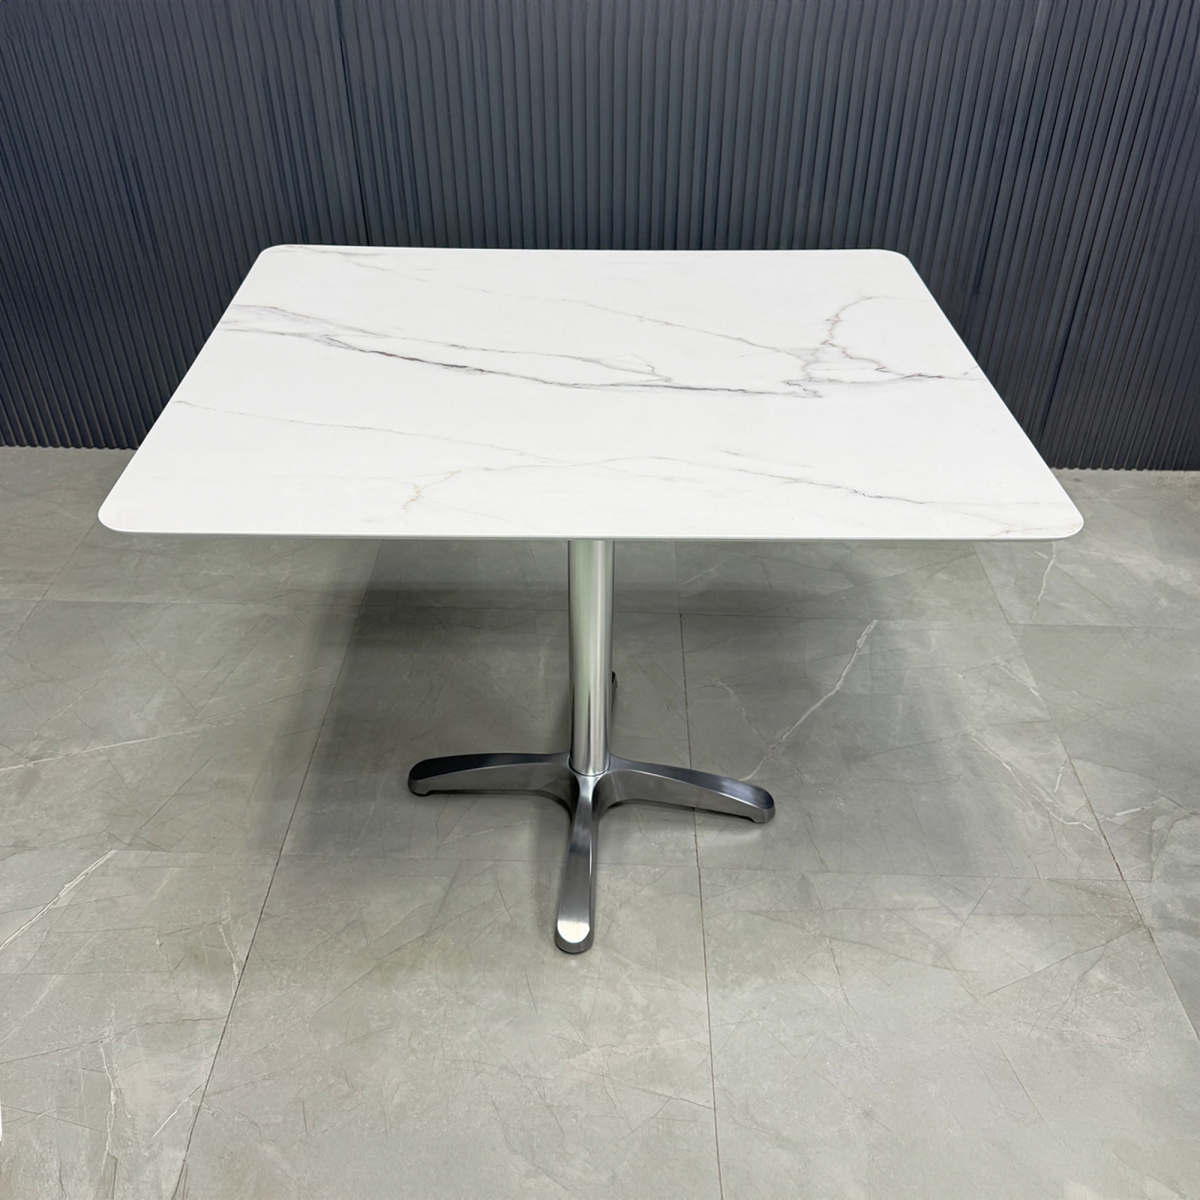 California Rectangular Conference/Cafeteria Table with Solenne Marble Engineered Stone Top - 34 In. - Stock #70